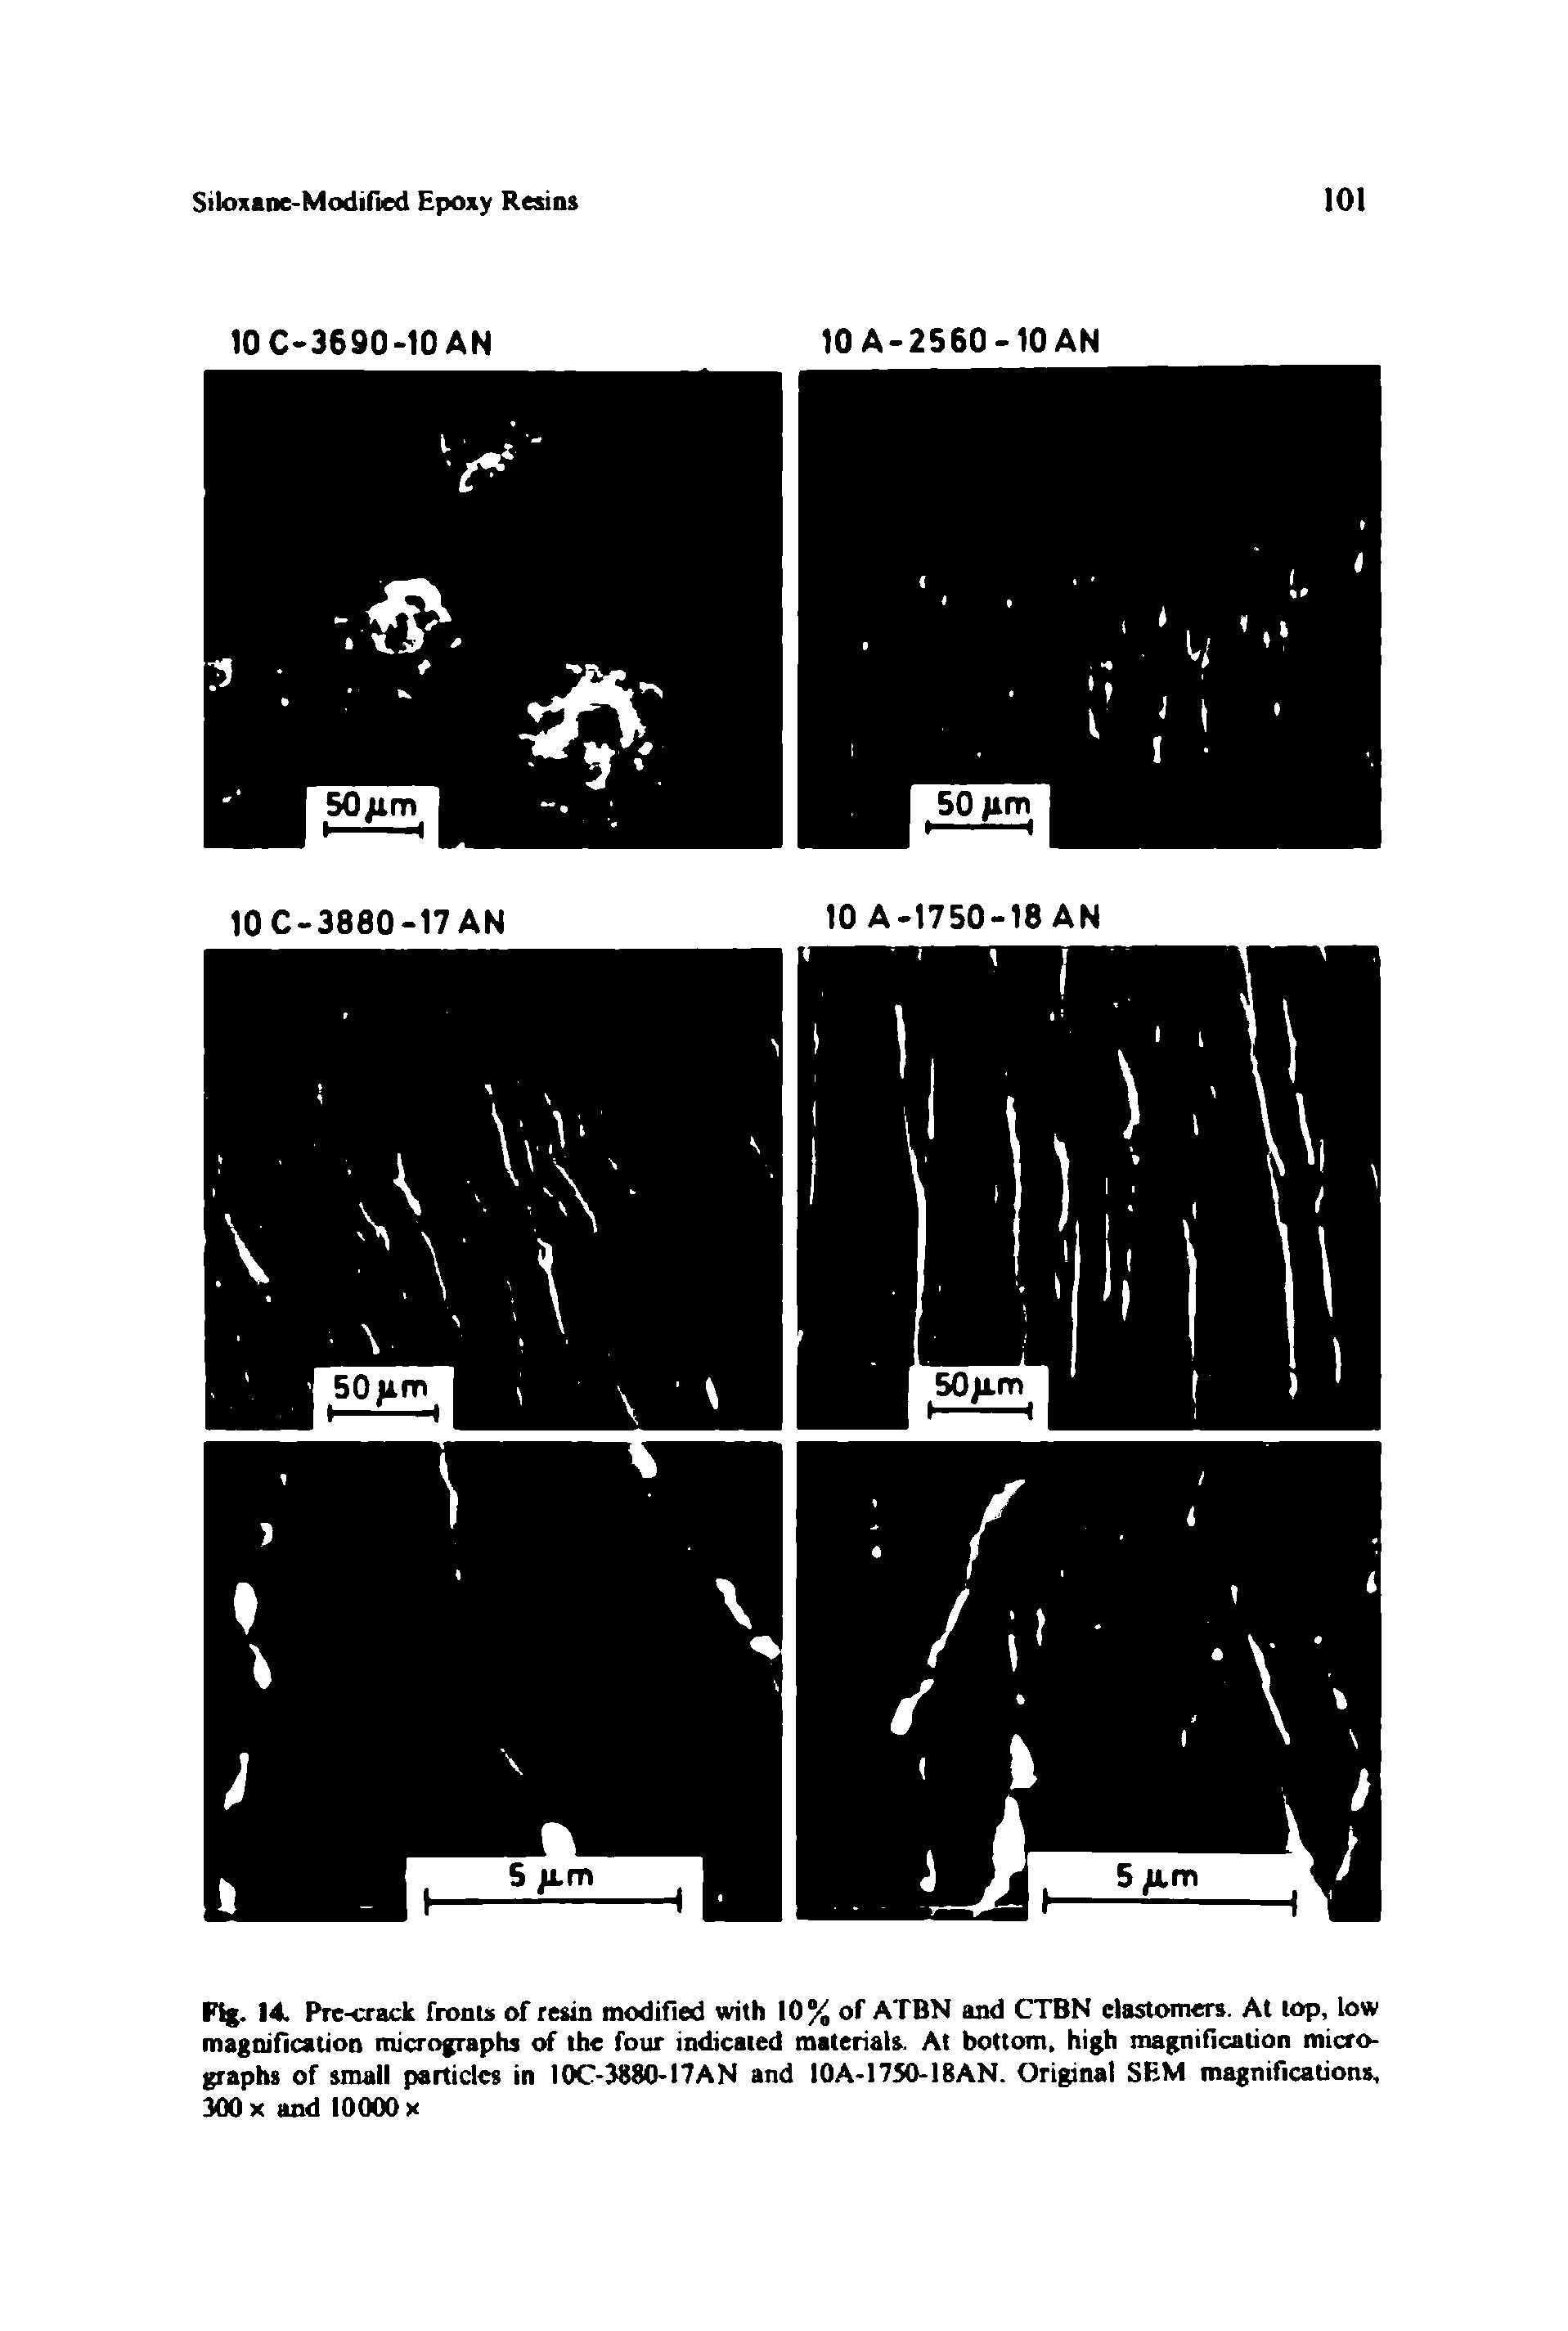 Fig. 14. Pre-crack fronts of resin modified with 10% of ATBN and CTBN elastomers. At top, low magnification micrographs of the four indicated materials. At bottom, high magnification micrographs of small particles in 10C-3880-I7AN and 10A-1750-18AN. Original SEM magnifications, 300 x and 10000 x...